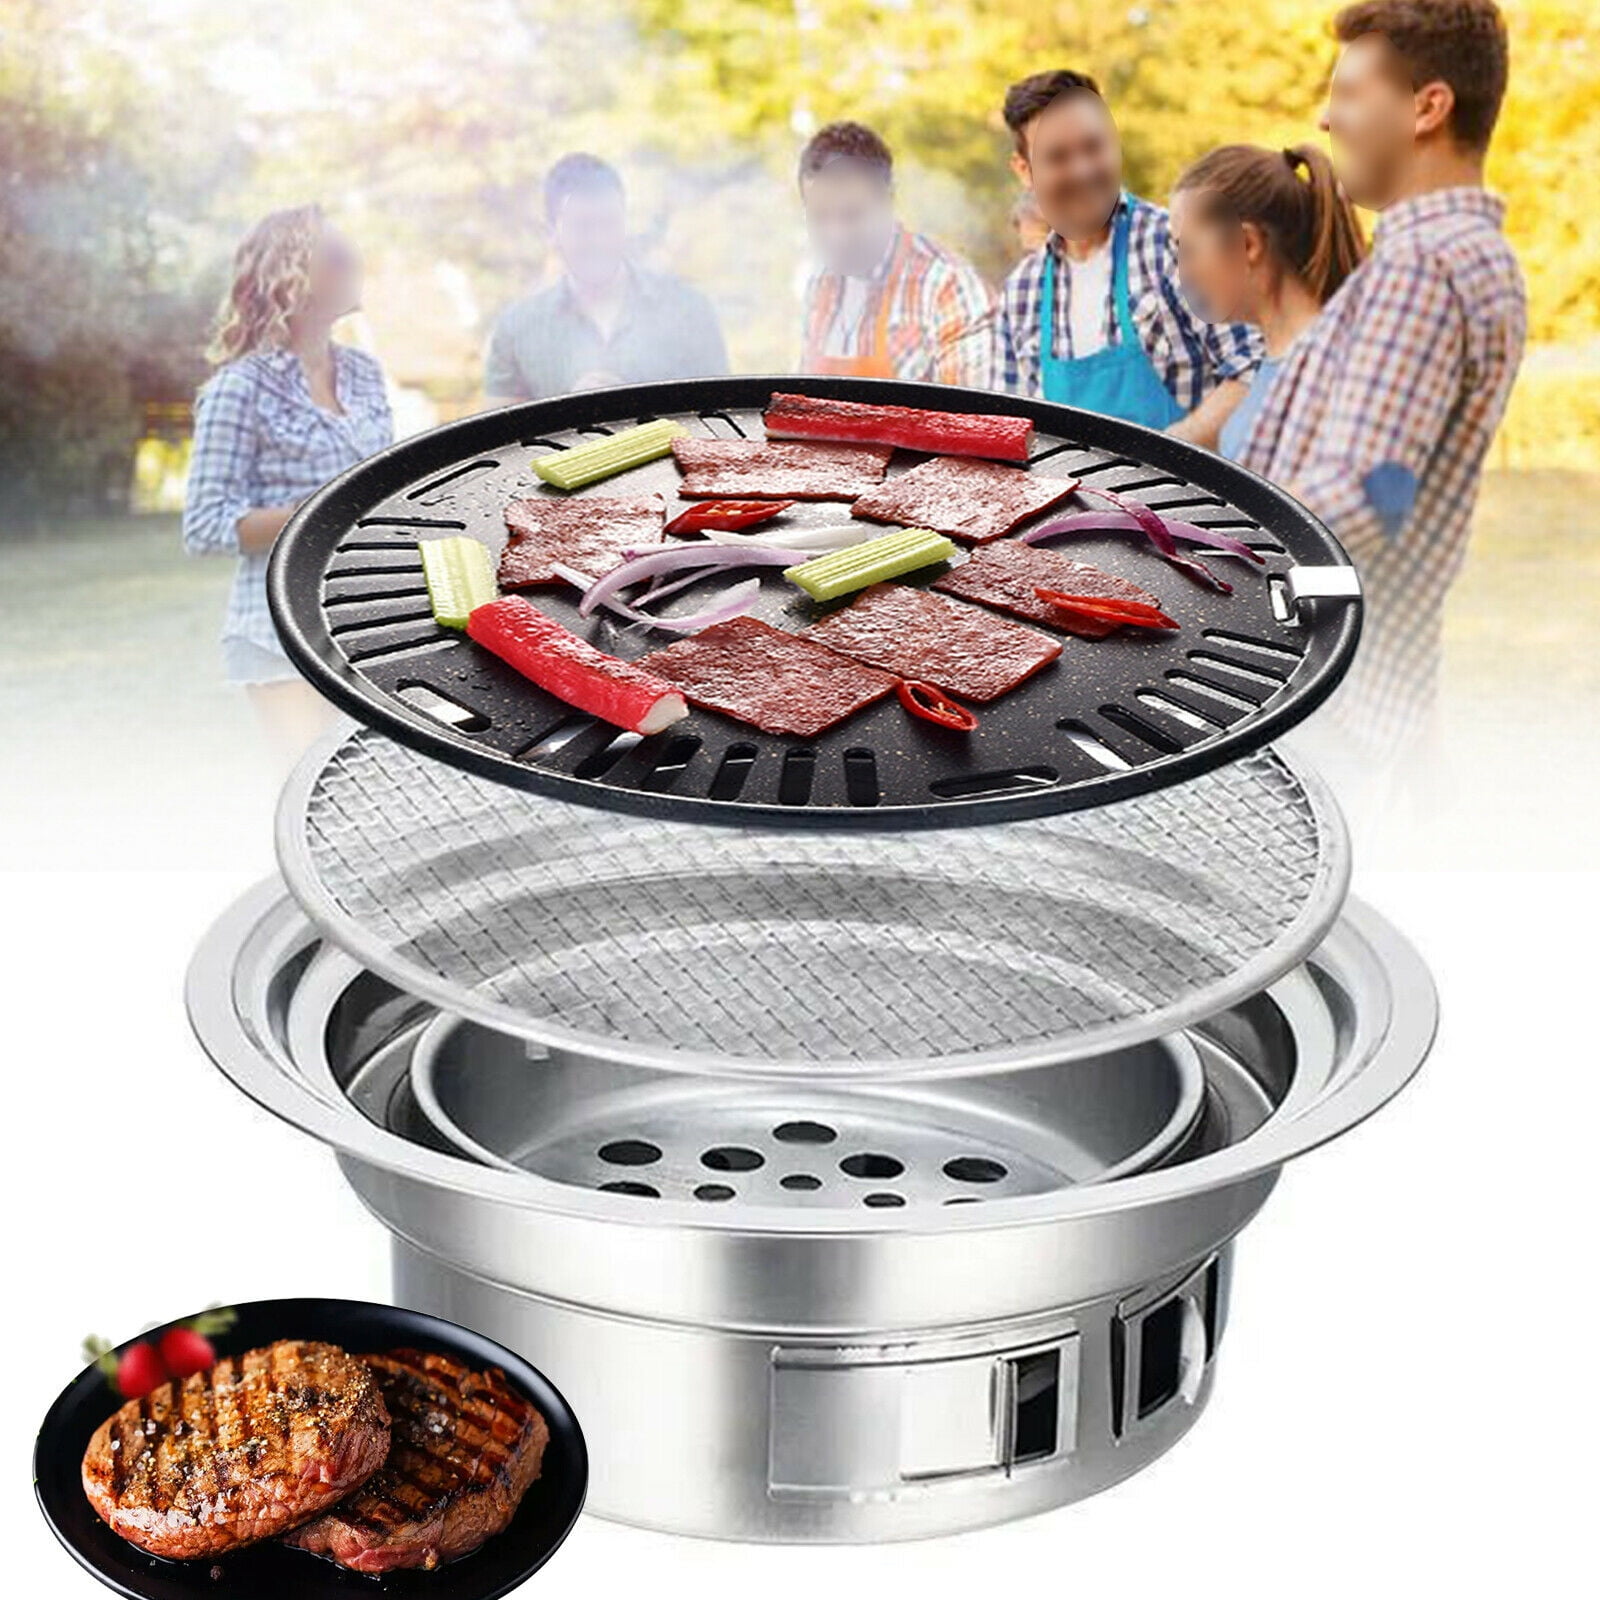 Charcoal Grill Korean Barbecue Grill Portable Stainless Steel Non-stick Charcoal Stove for Outdoor Camping BBQ Grill 13.7 inches Small Grill Outdoor Cooking